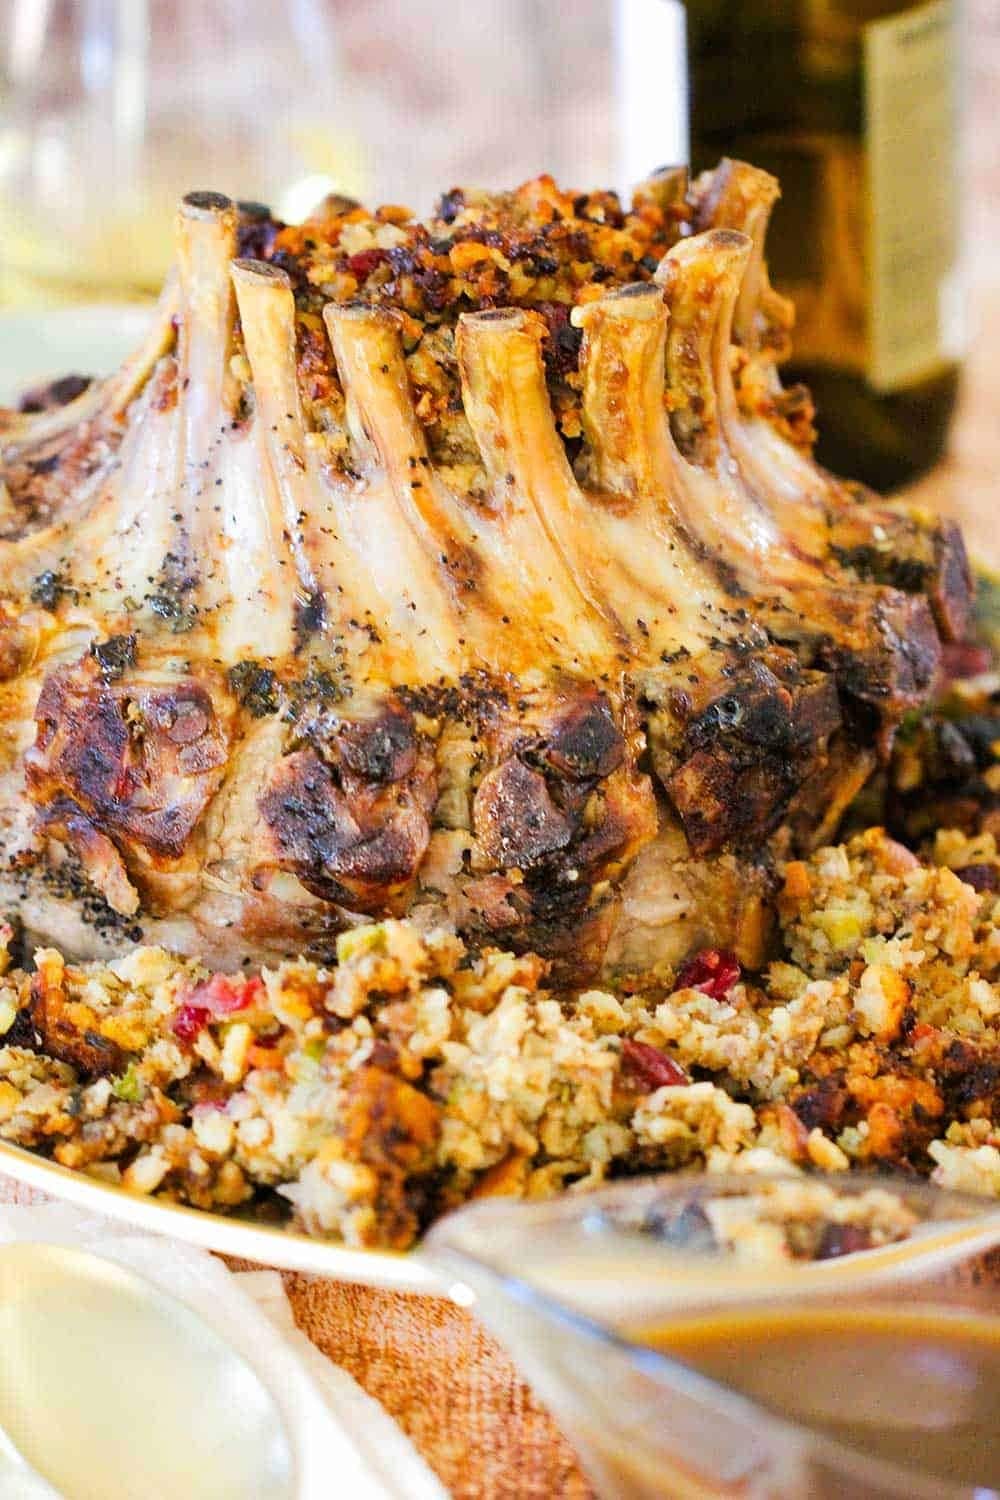 Pork ribs arranged like a crown with stuffing topped with sauce. 